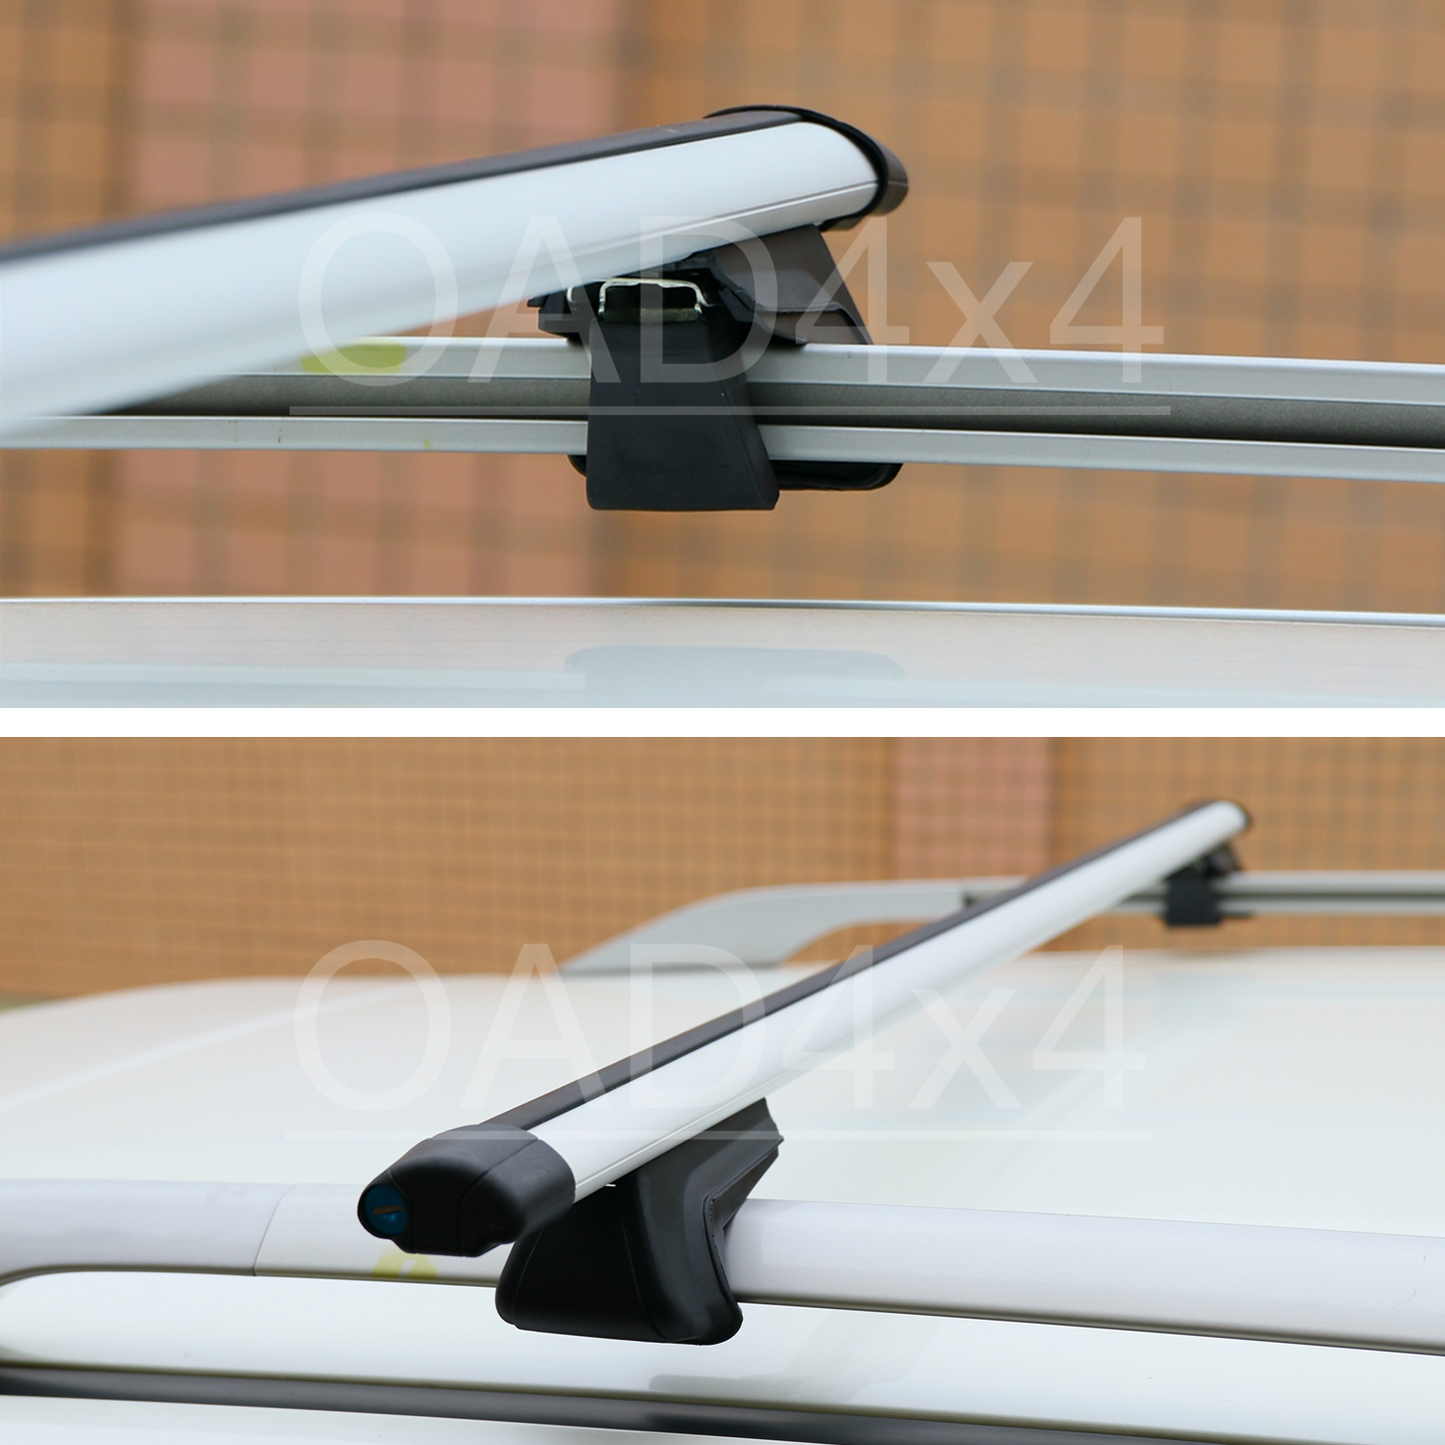 1 Pair Aluminum Silver Cross Bar Roof Racks Baggage holder for Skoda Roomster 06-18 with raised roof rail